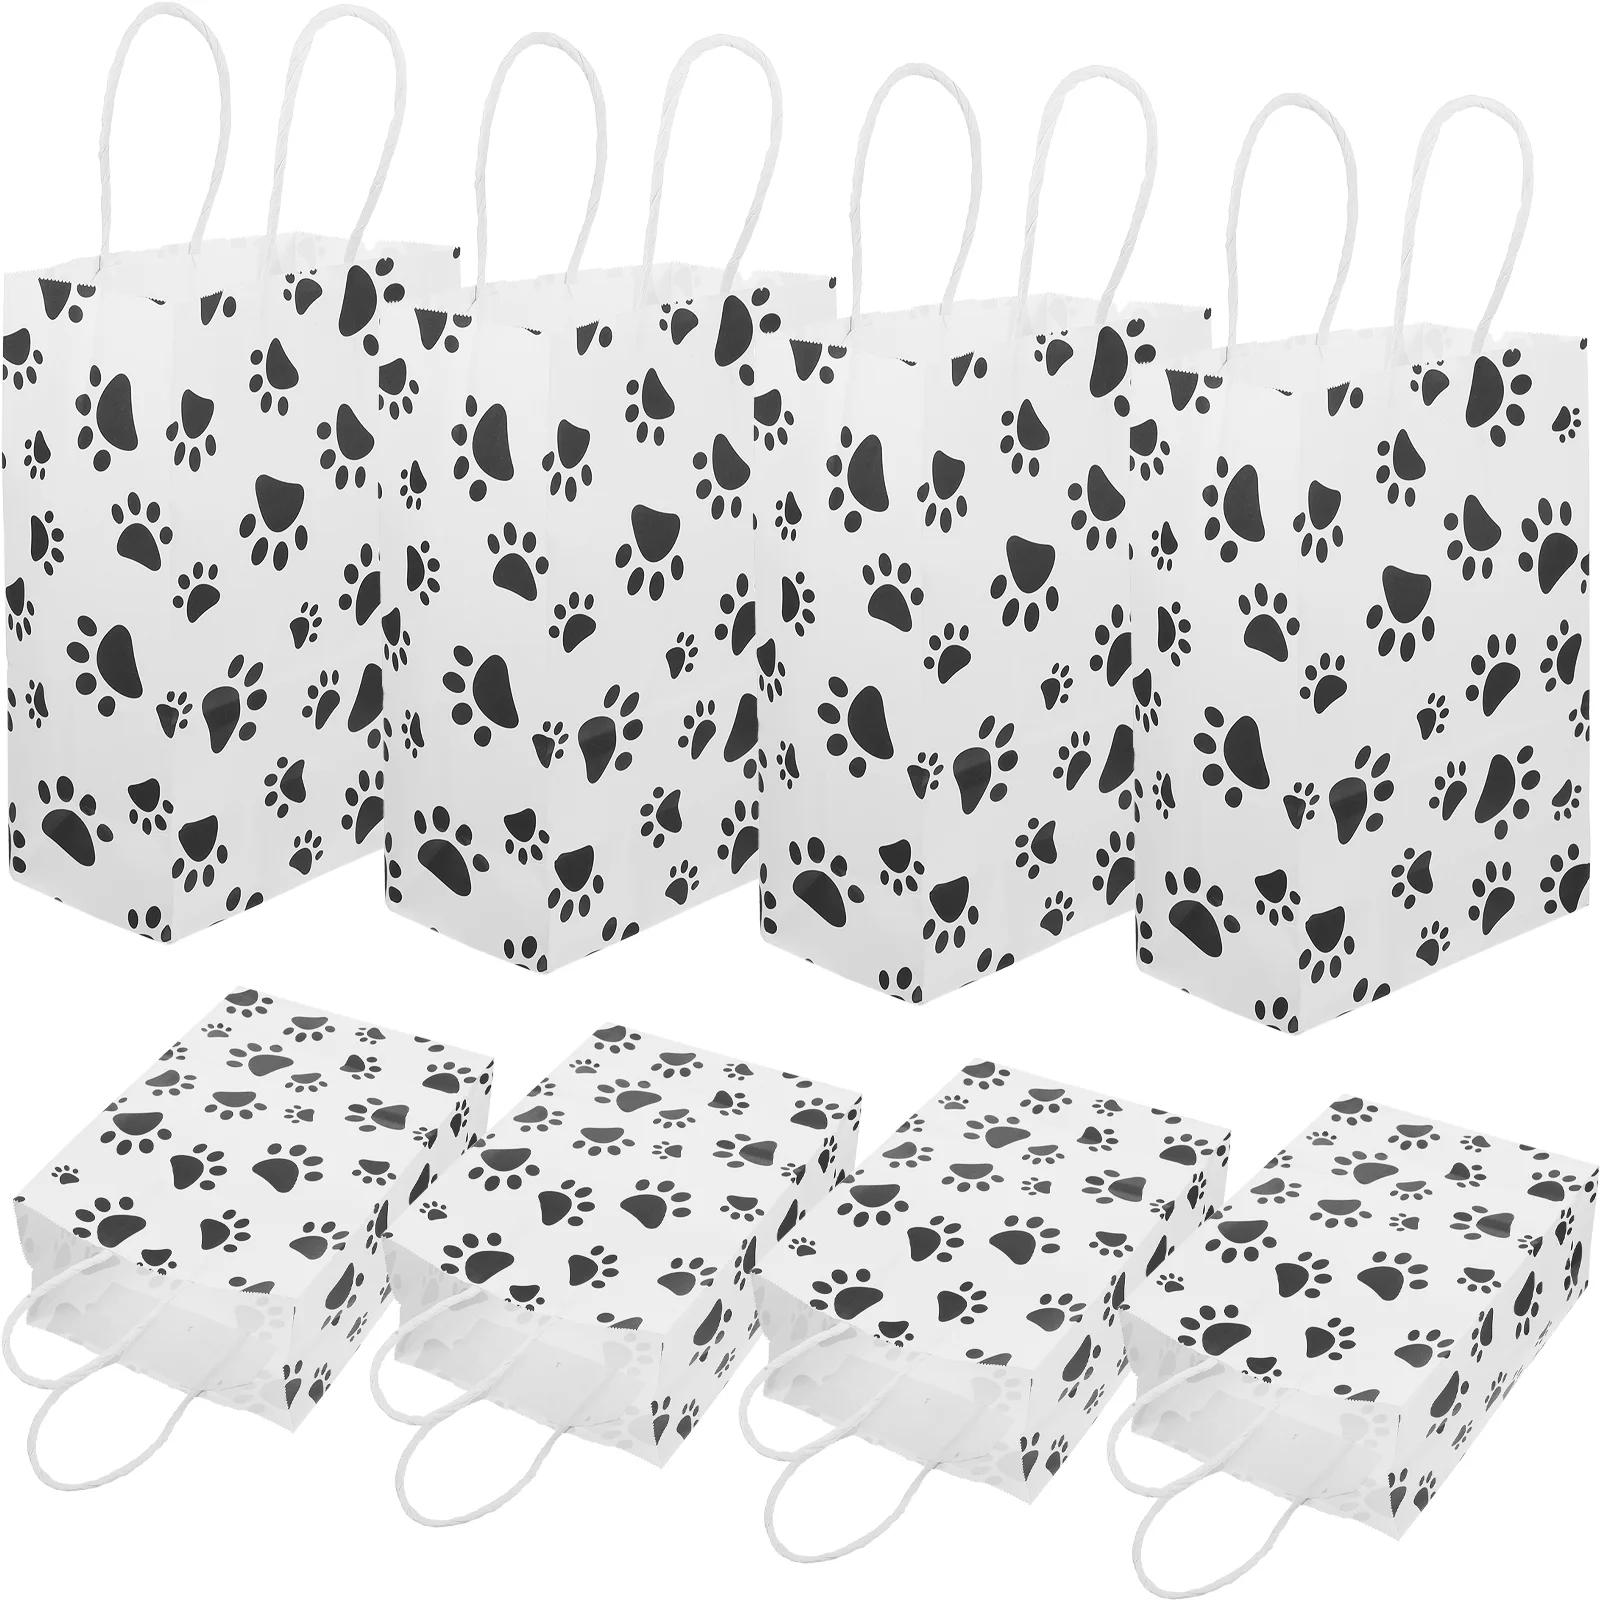 

20pcs Dog Paw Printed Gift Bags with Handles Theme Party Favors Bags Goodies Bags